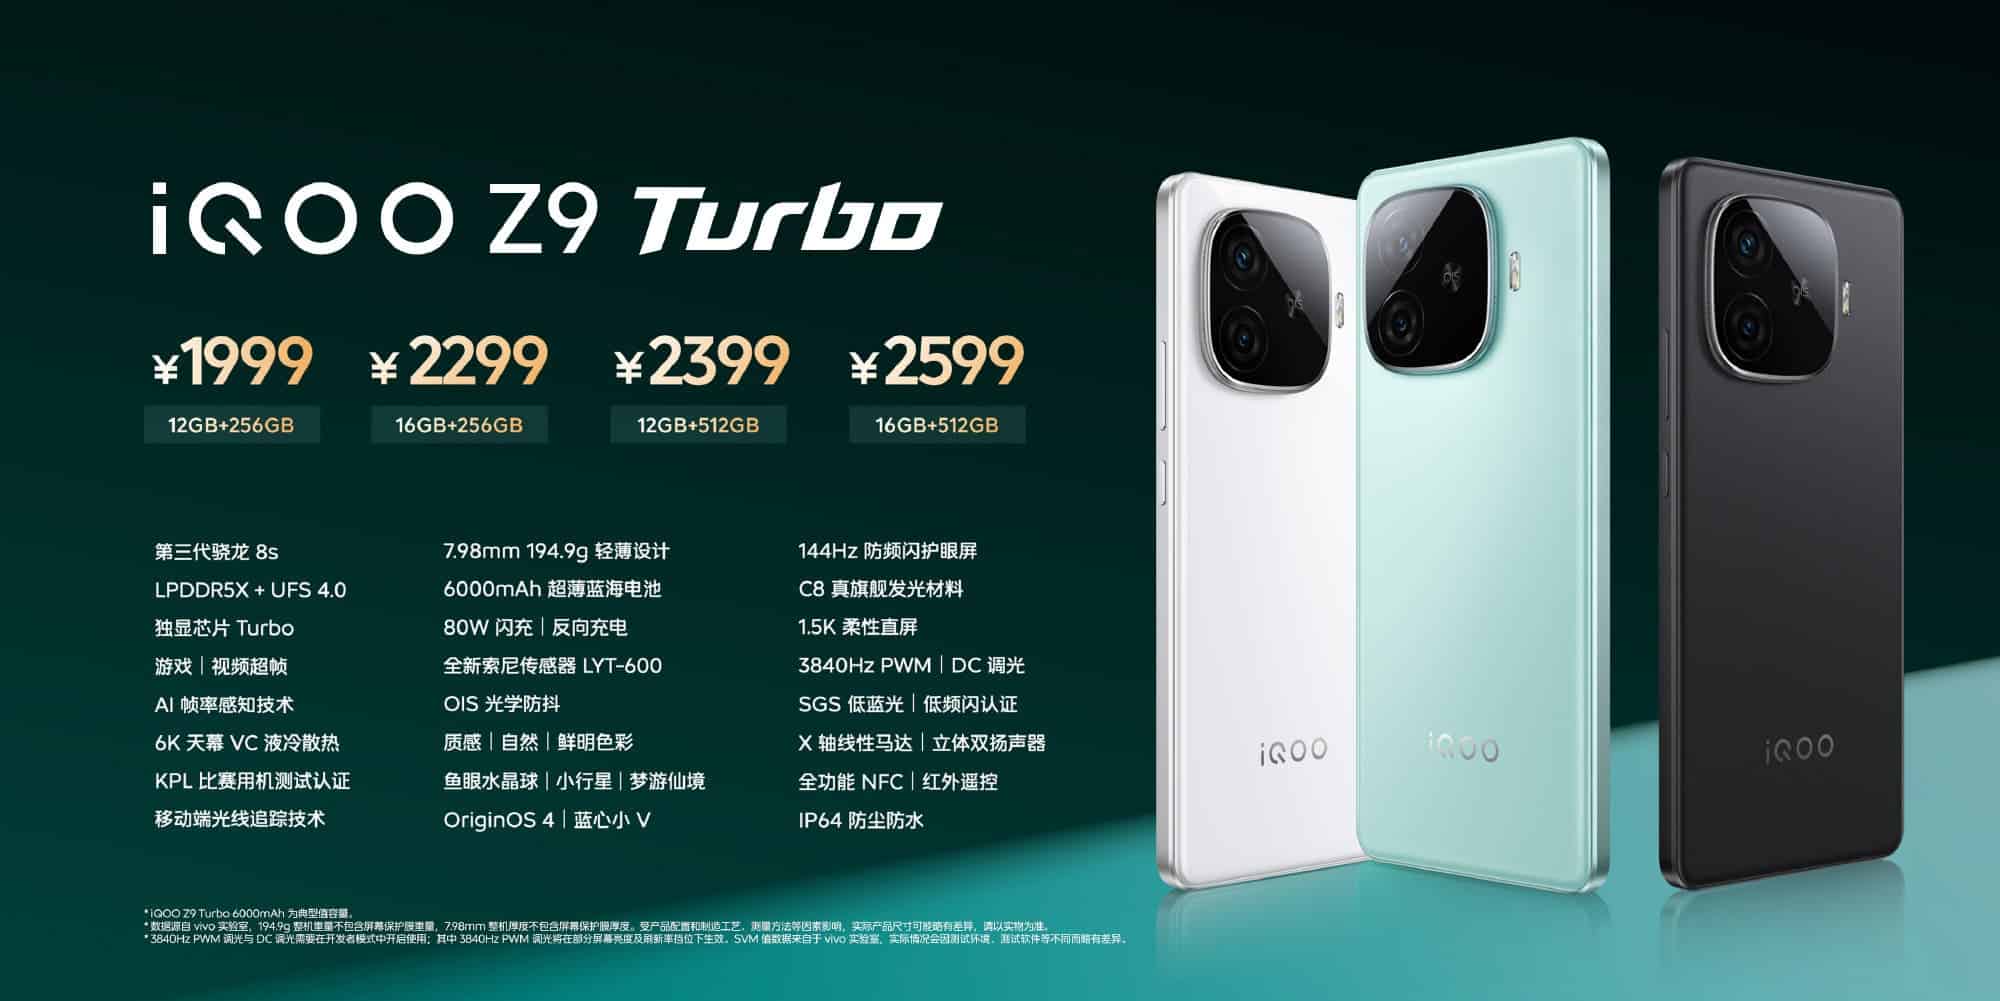 Main specs and pricing